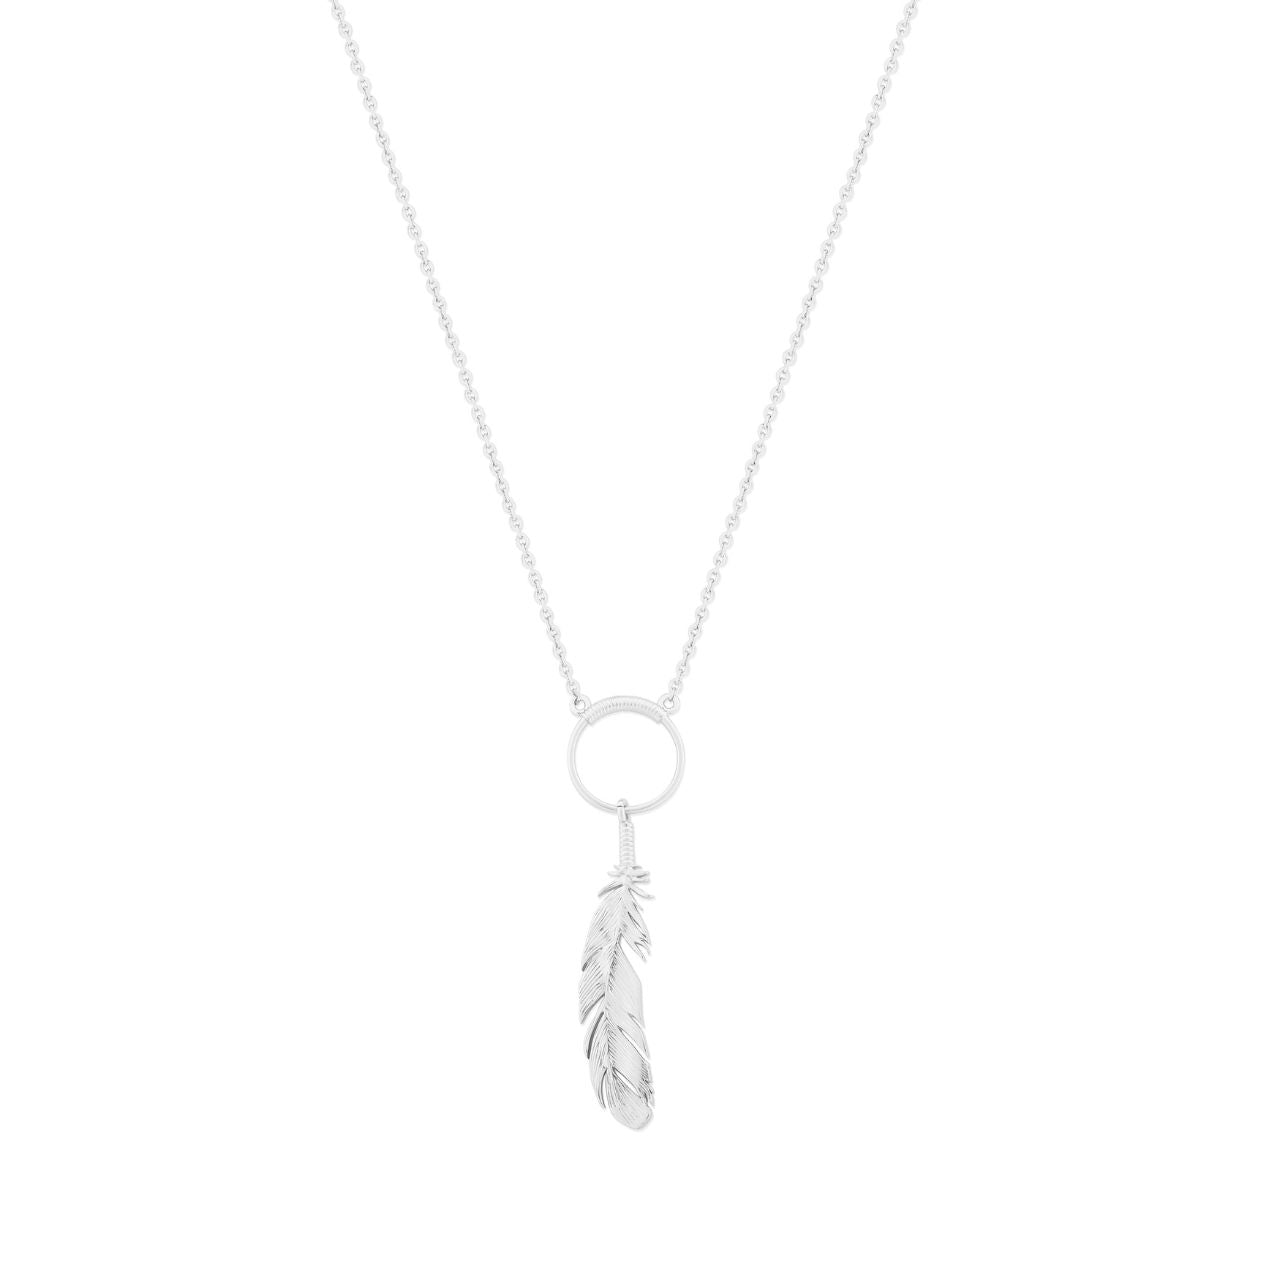 Silver Feather & Circle Pendant by Tipperary  Showcase your sense of style with this beautiful Silver Feather & Circle Pendant by Tipperary. Crafted with exquisite attention to detail, this piece of jewelry is a timeless addition to any wardrobe. Both durable and elegant, ensuring it will remain a treasured item for many years to come.